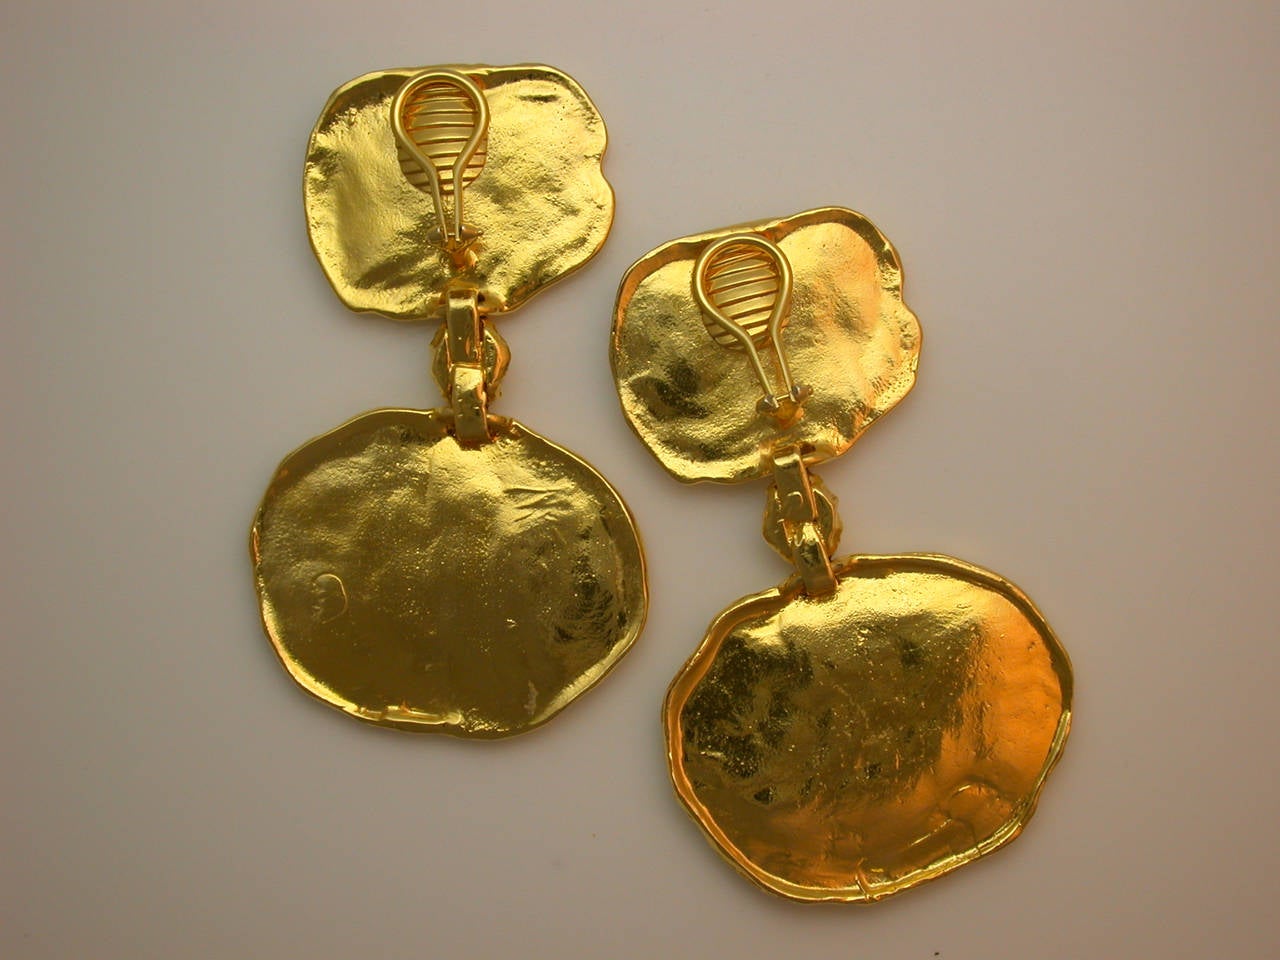 Designed as heavily textured coin shapes clipped to the ear, flexibly joined by nugget-shaped elements to larger coin shapes similarly textured, mounted in sterling silver plated with 24kt yellow gold (